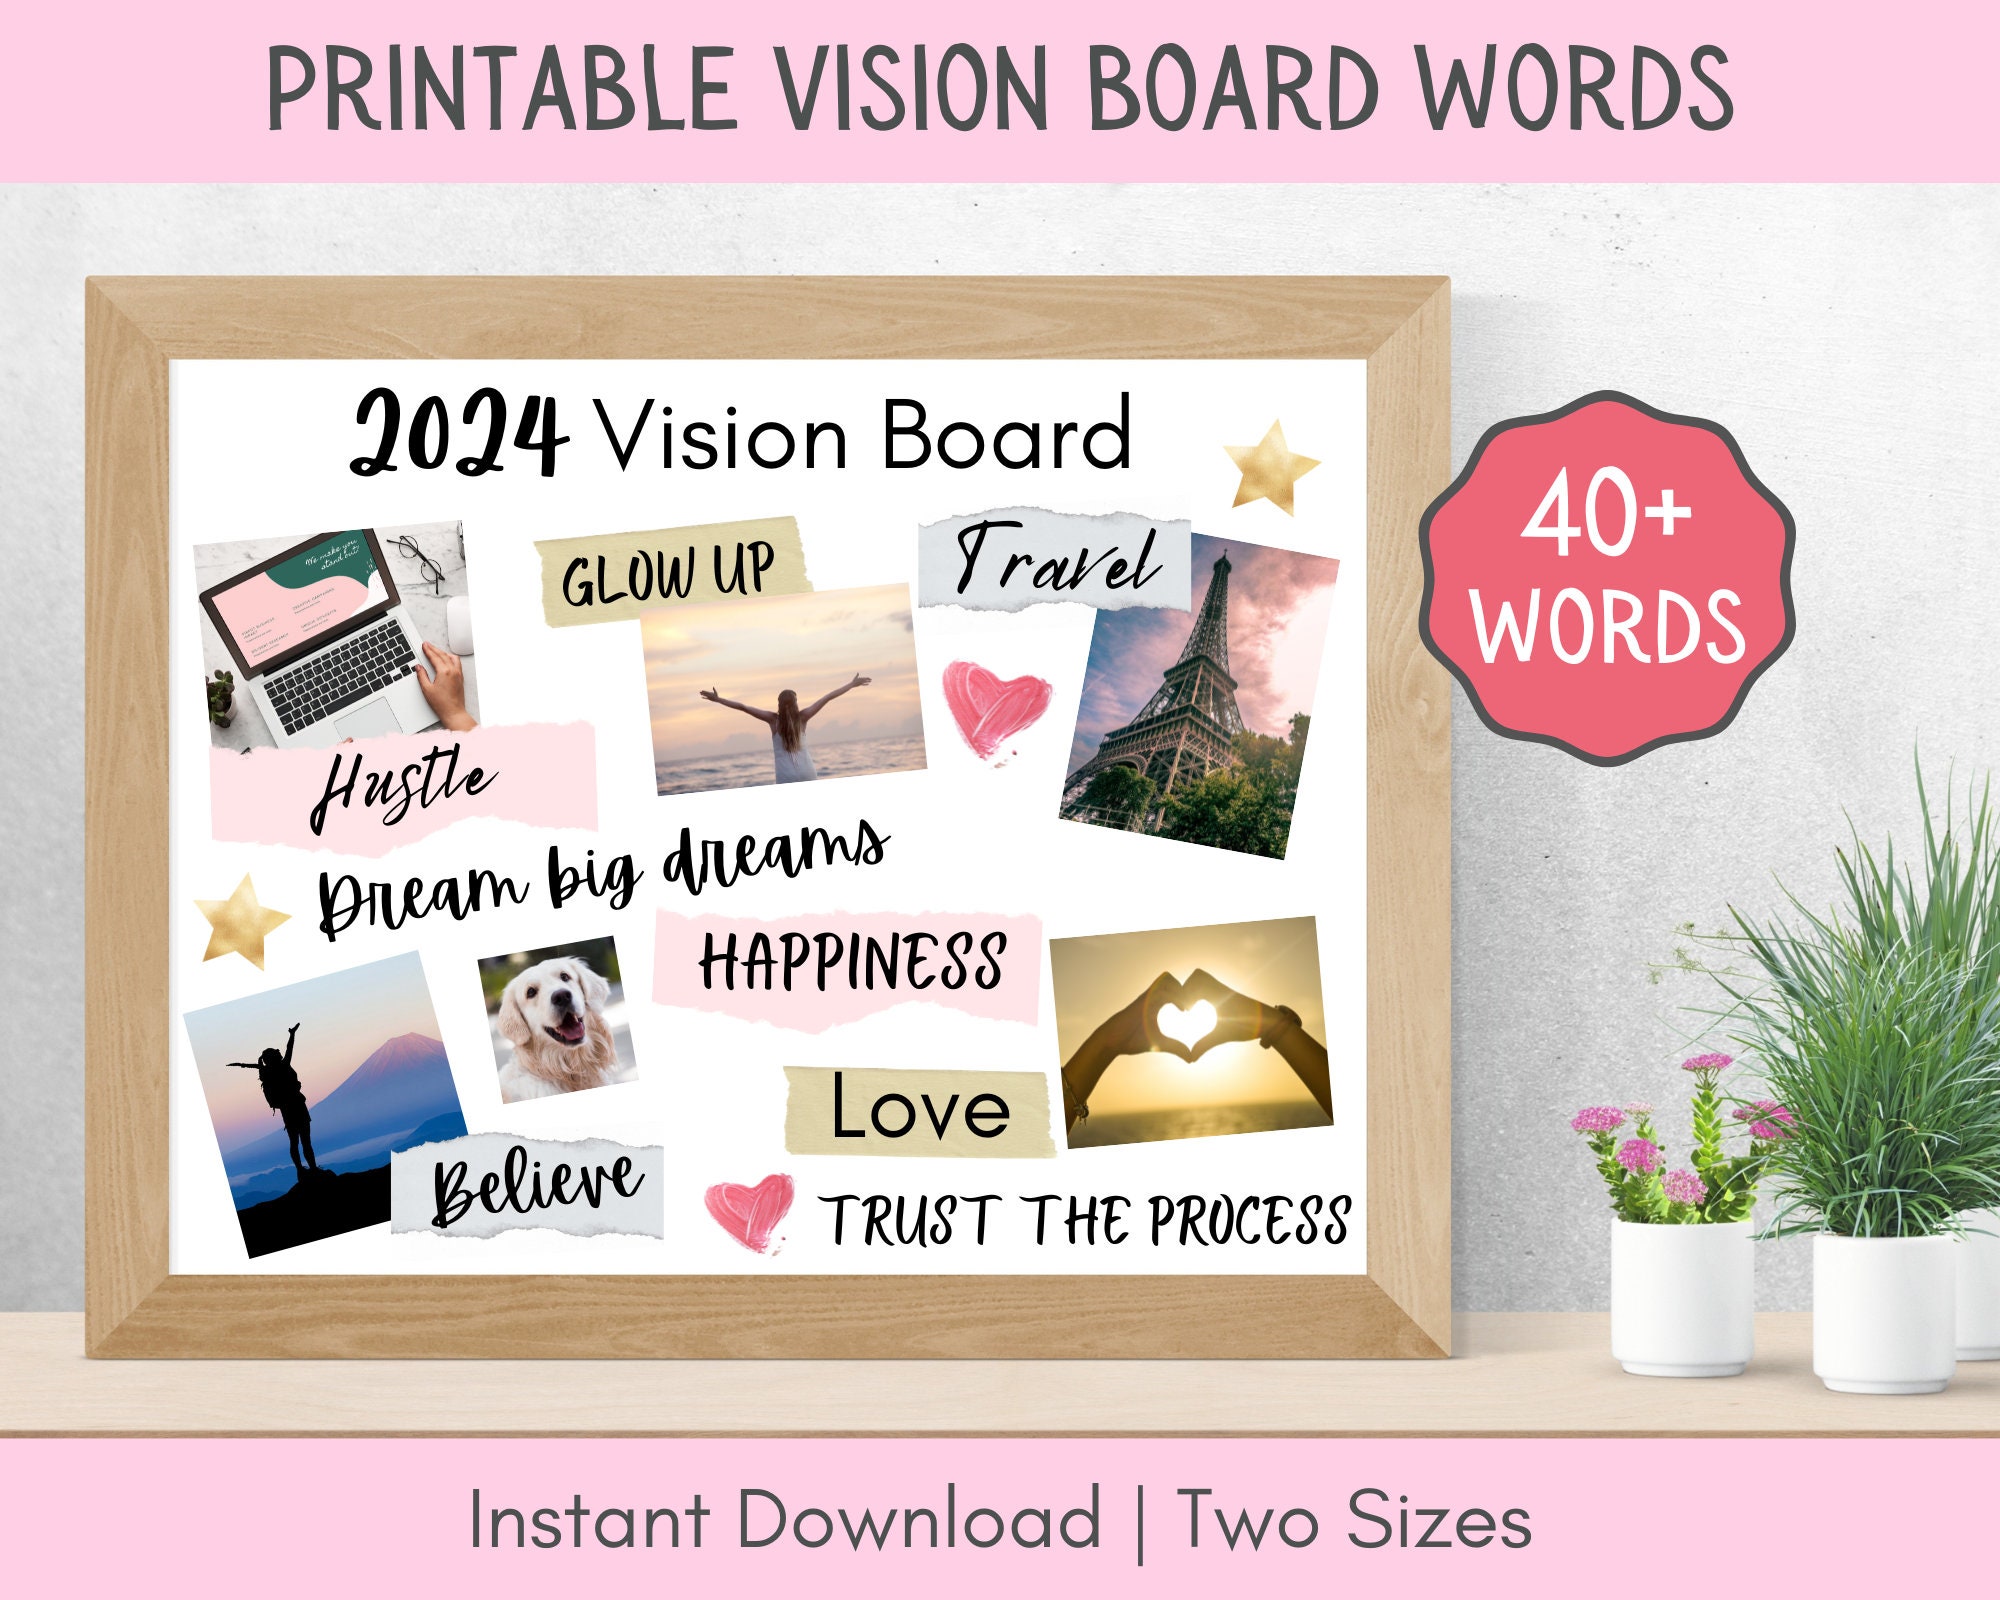 Vision Board Clip Art Book: Create Powerful Vision Boards from 500+  Pictures, Quotes & Words Vision Board new year For Women, Men to Achieve  Your Best